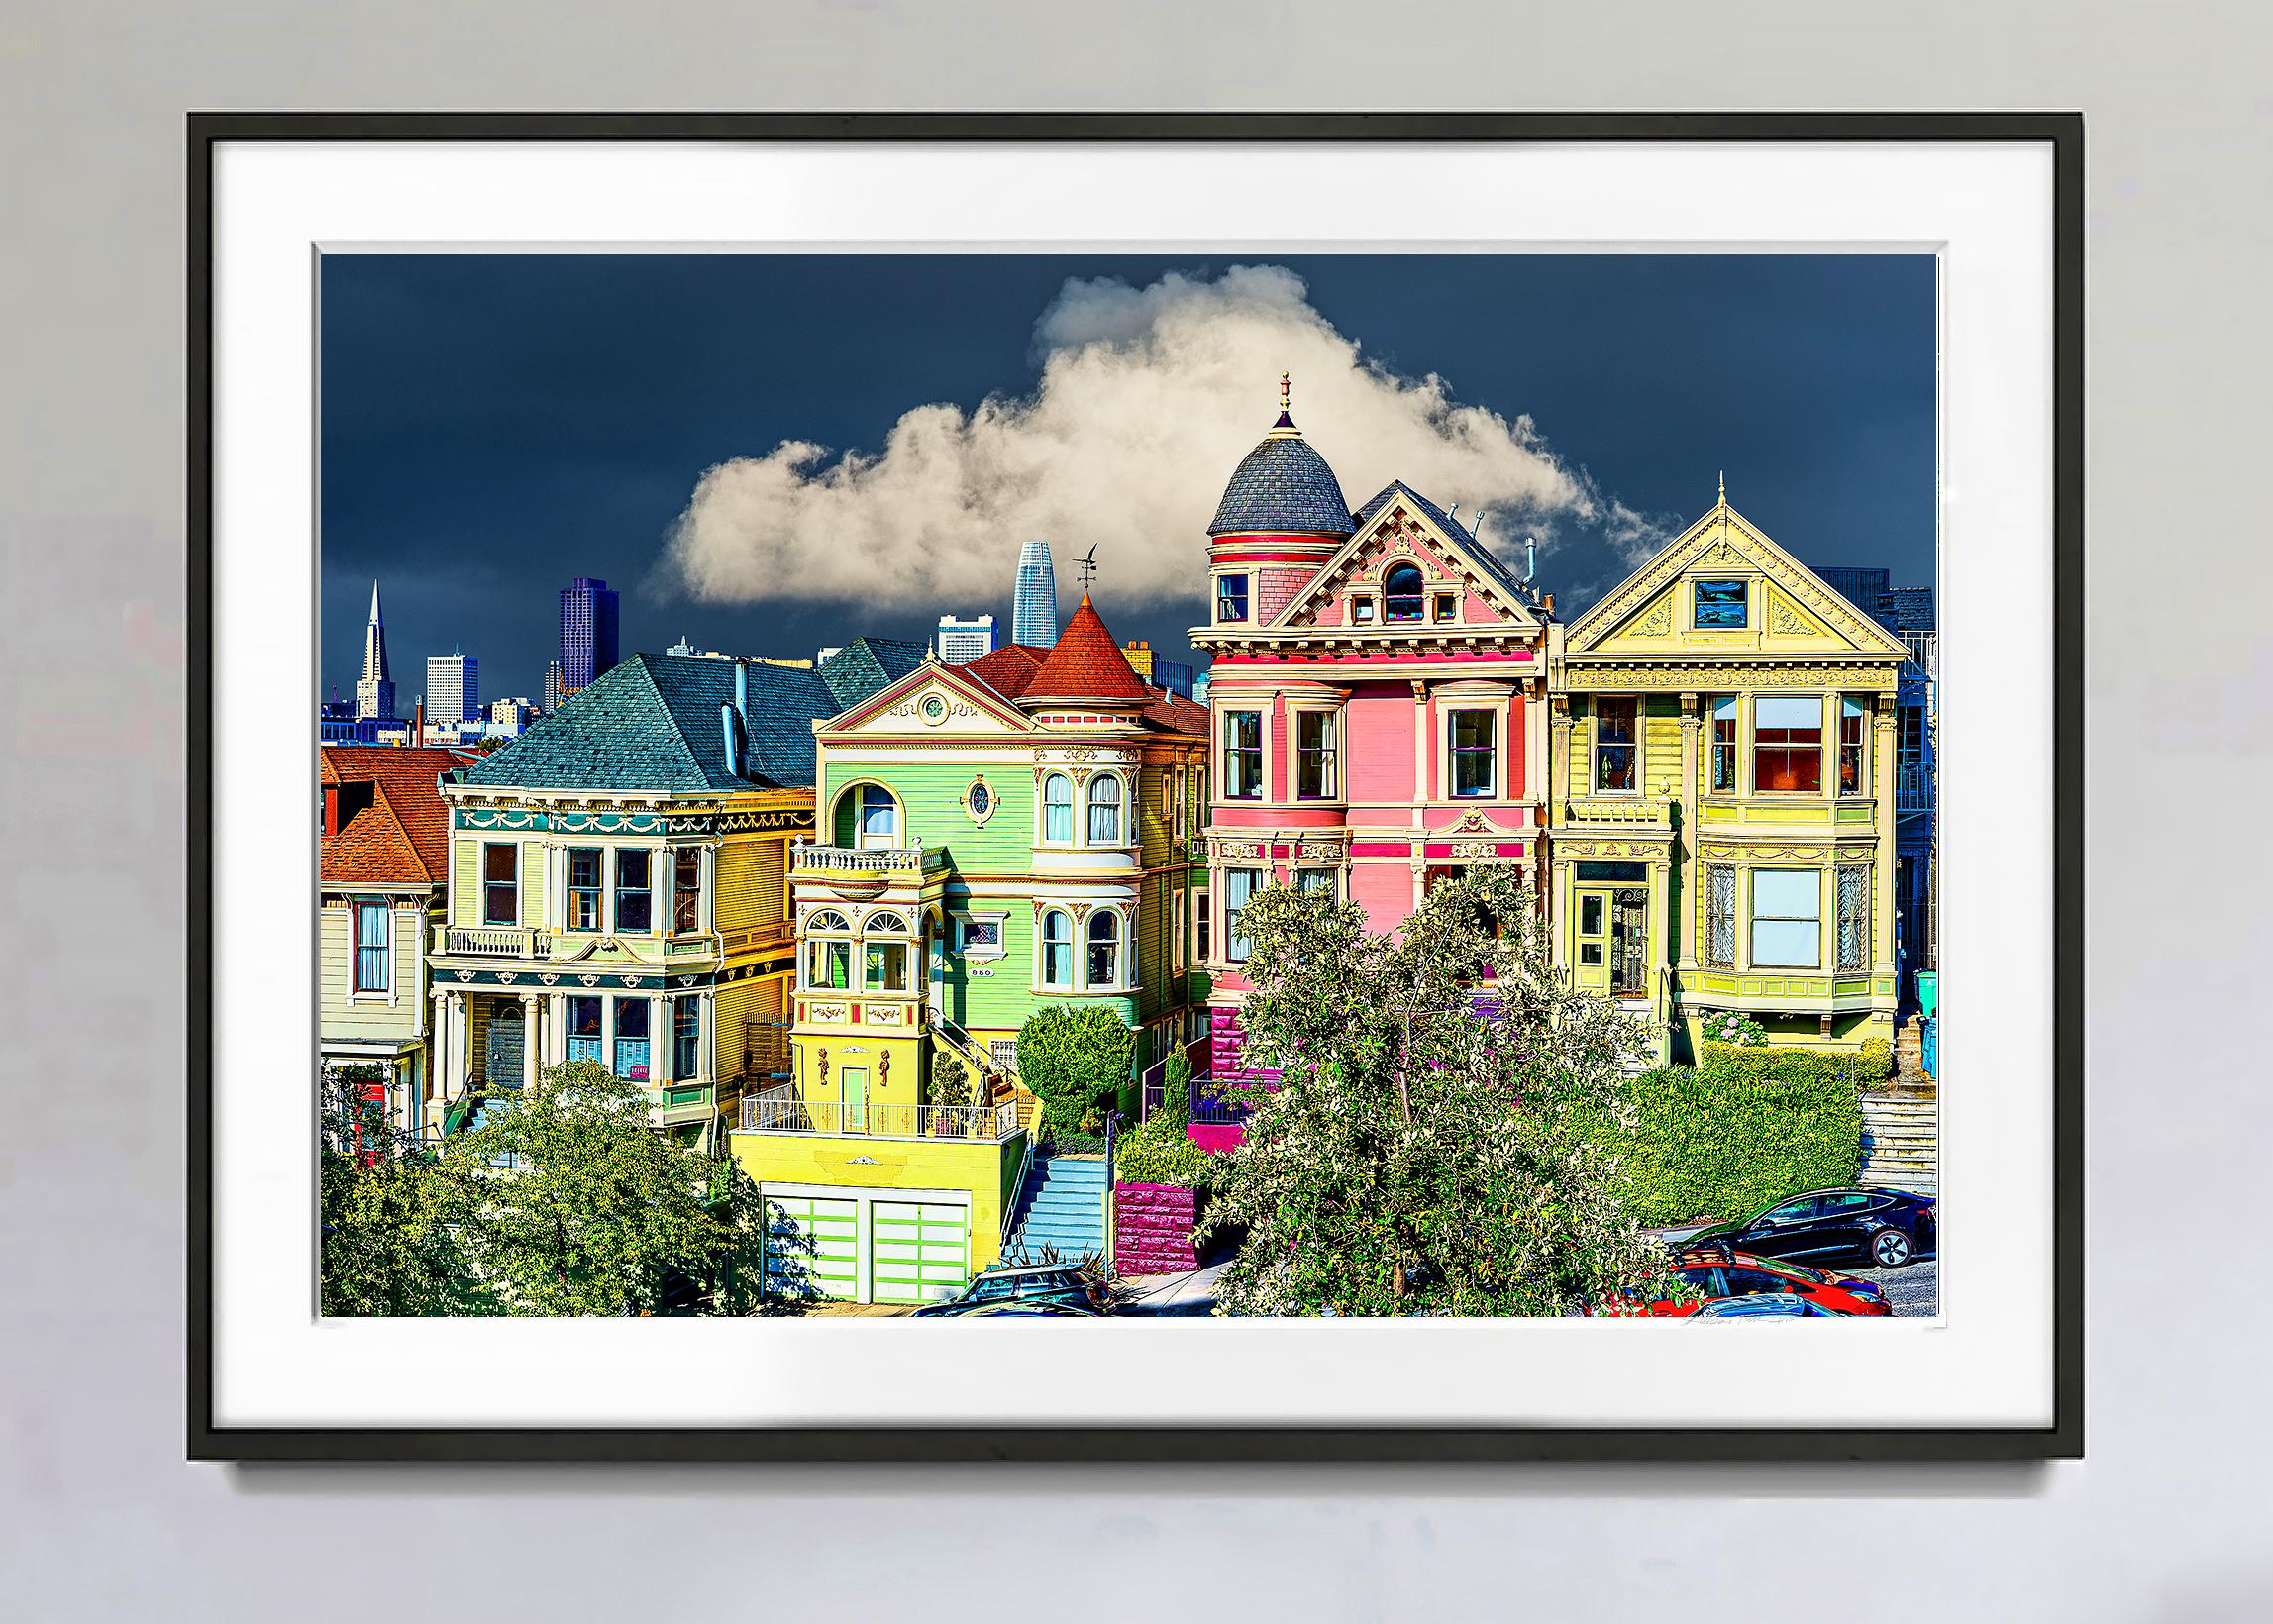 Painted Ladies Victorian Architecture,  Alamo Square San Francisco  - Photograph by Mitchell Funk